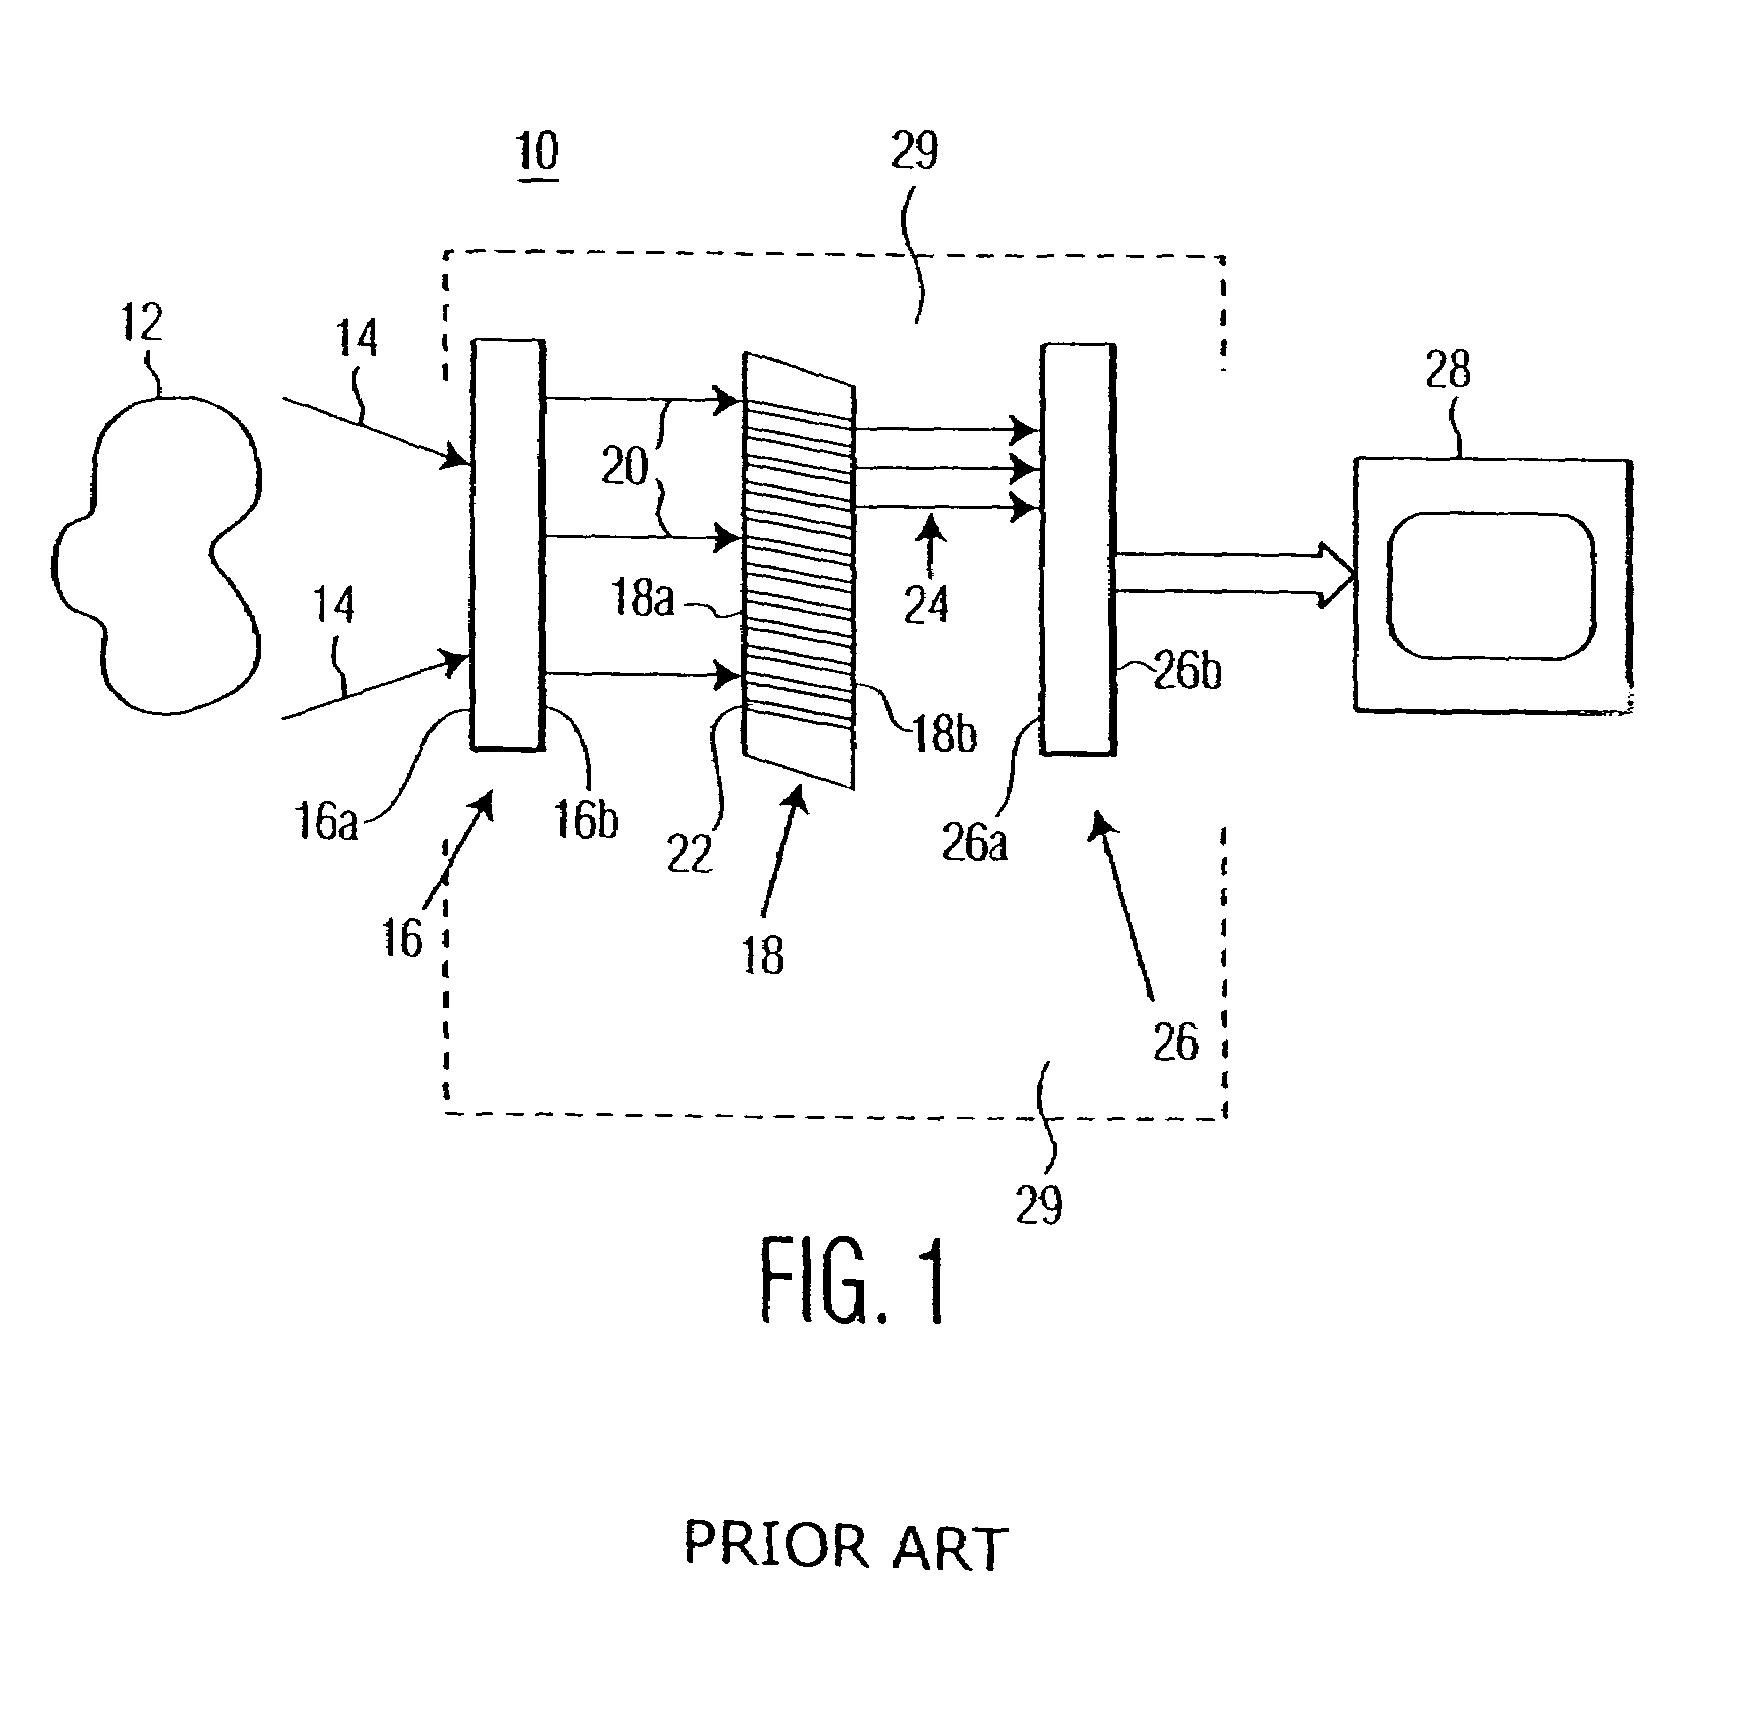 Low profile wire bond for an electron sensing device in an image intensifier tube